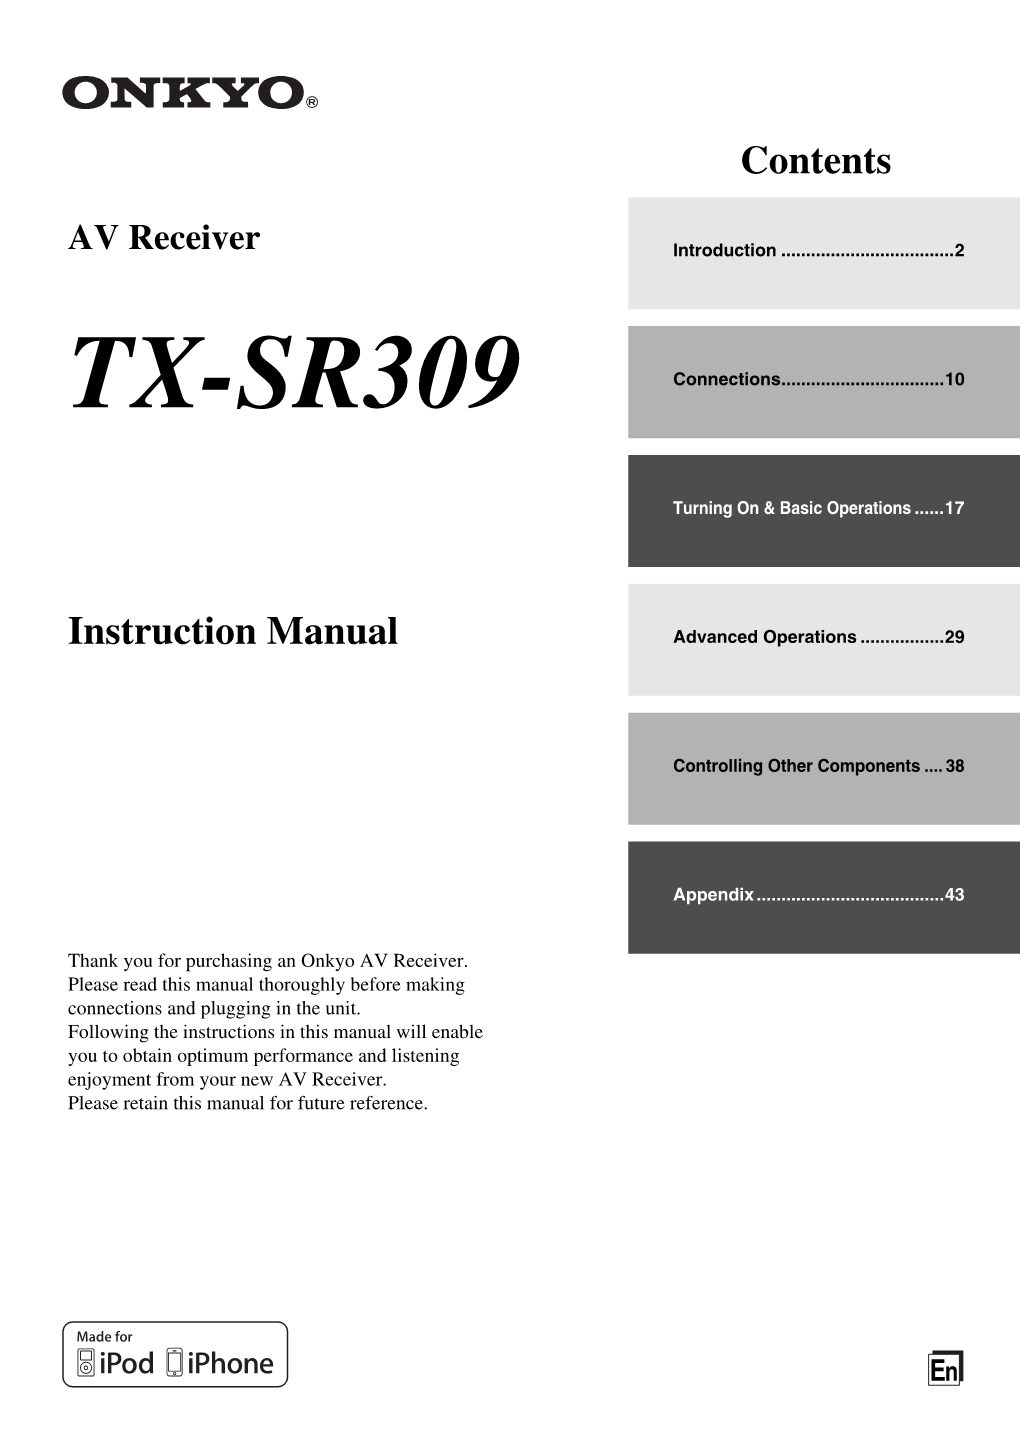 TX-SR309 Connections